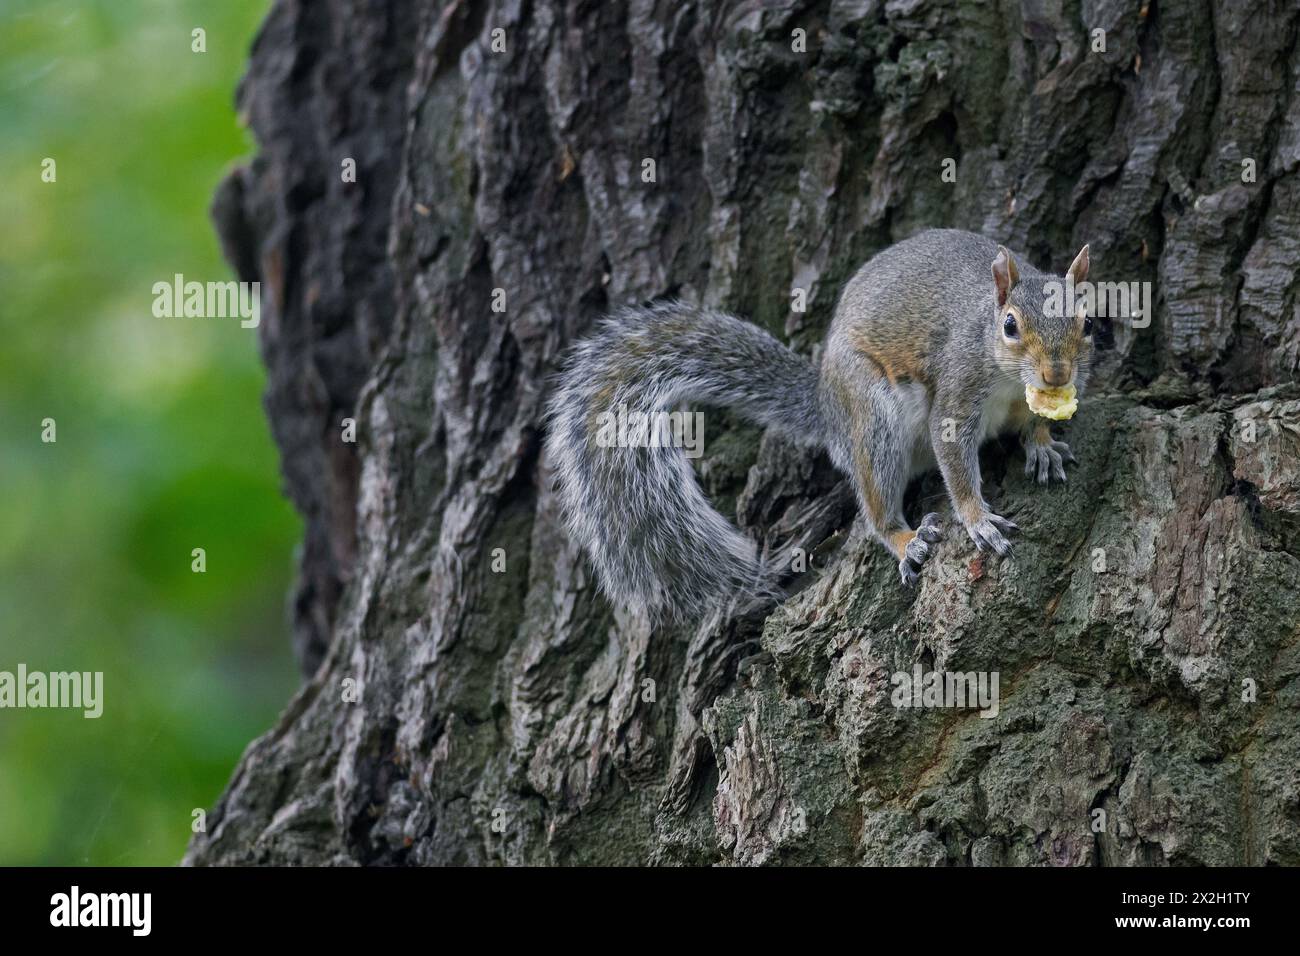 Eastern grey squirrel (Sciurus carolinensis), introduced species from North America, climbing tree in city park in England, UK Stock Photo